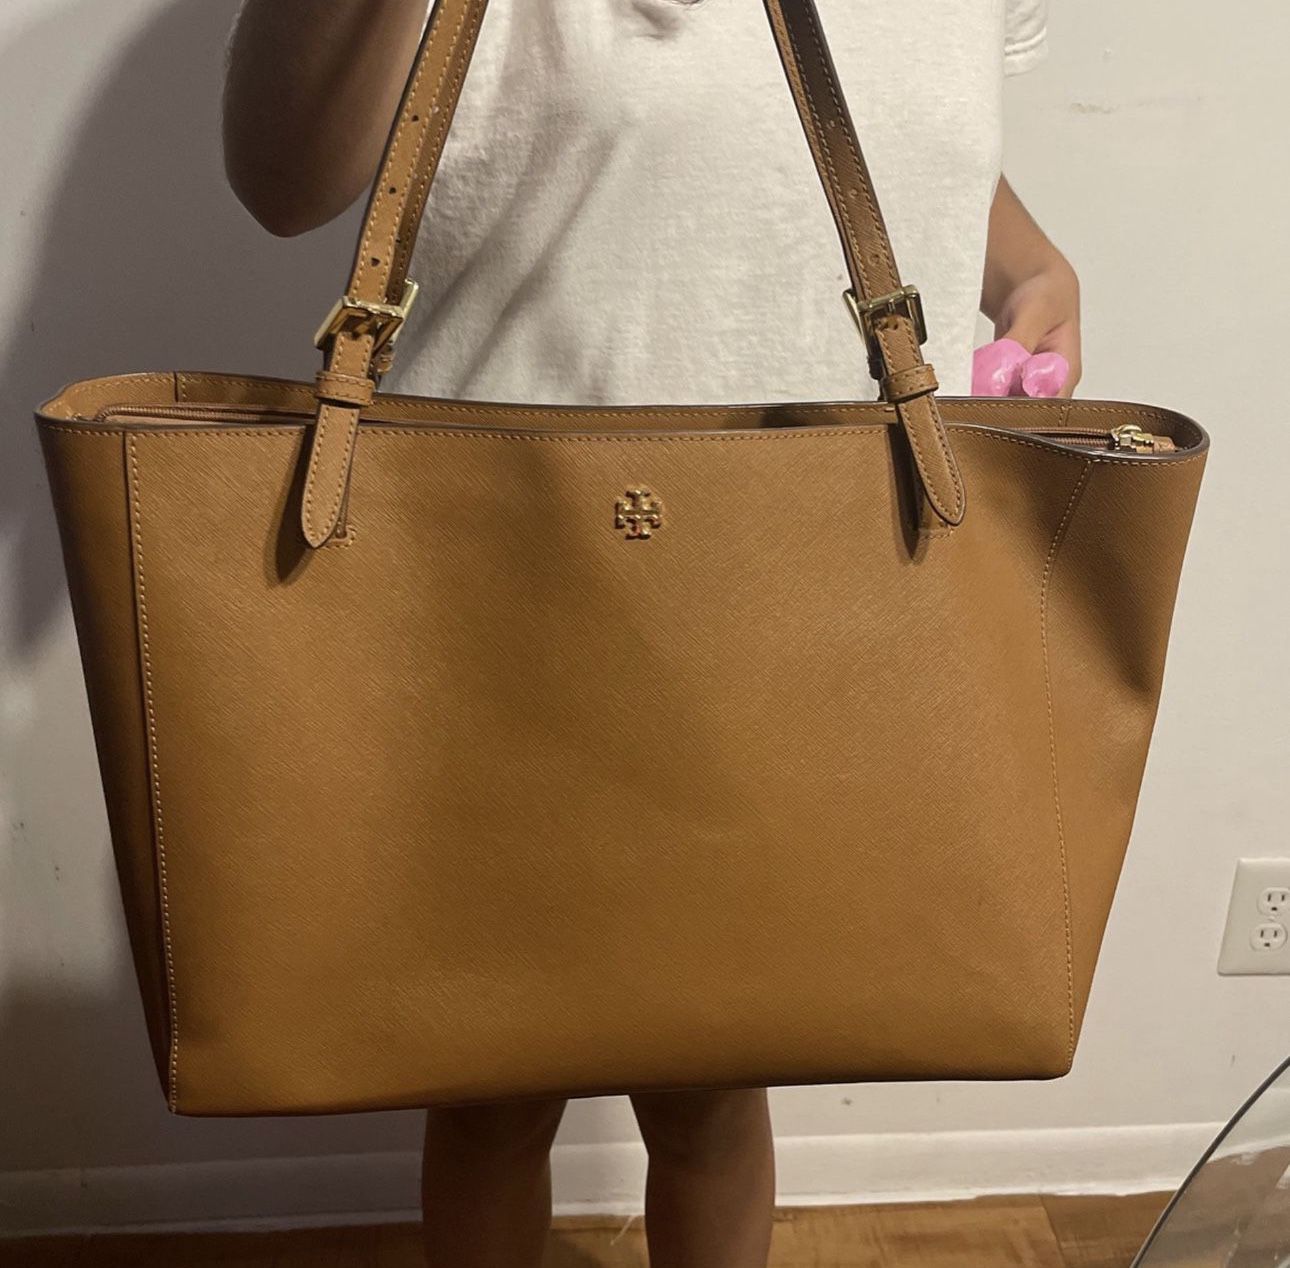 Tory Burch Tote for Sale in Orlando, FL - OfferUp